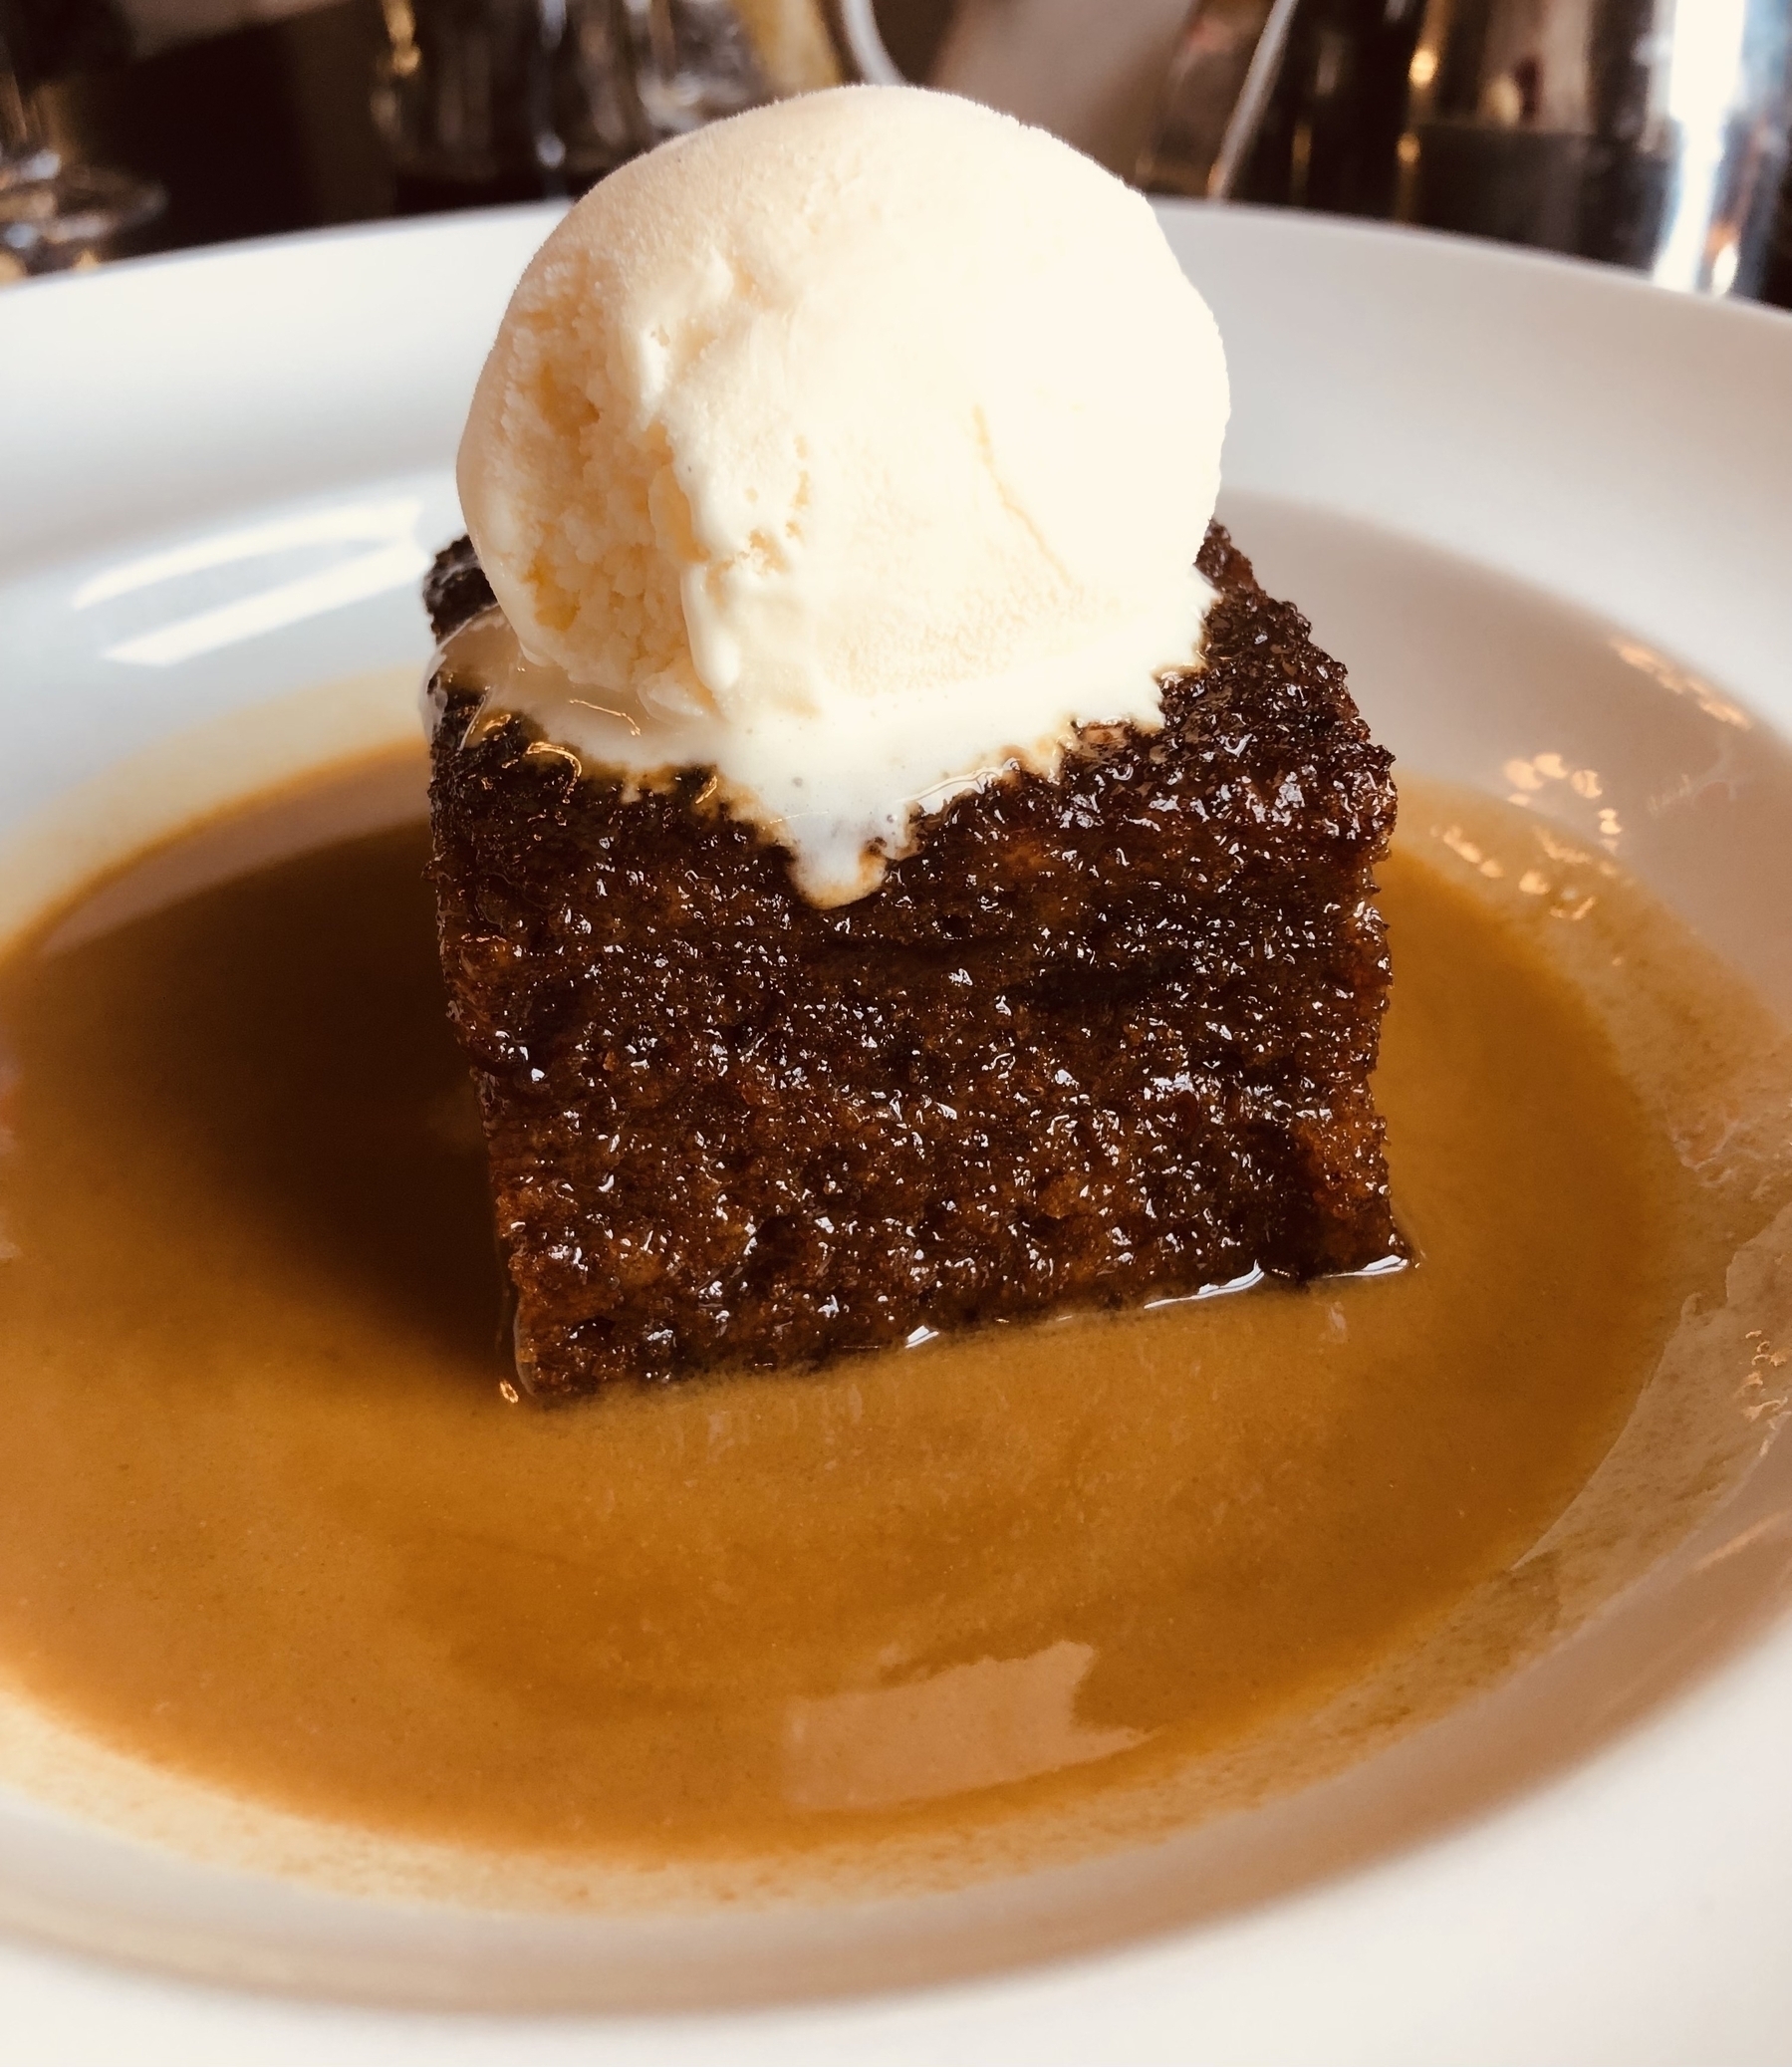 A bowl of sticky toffee pudding with icecream